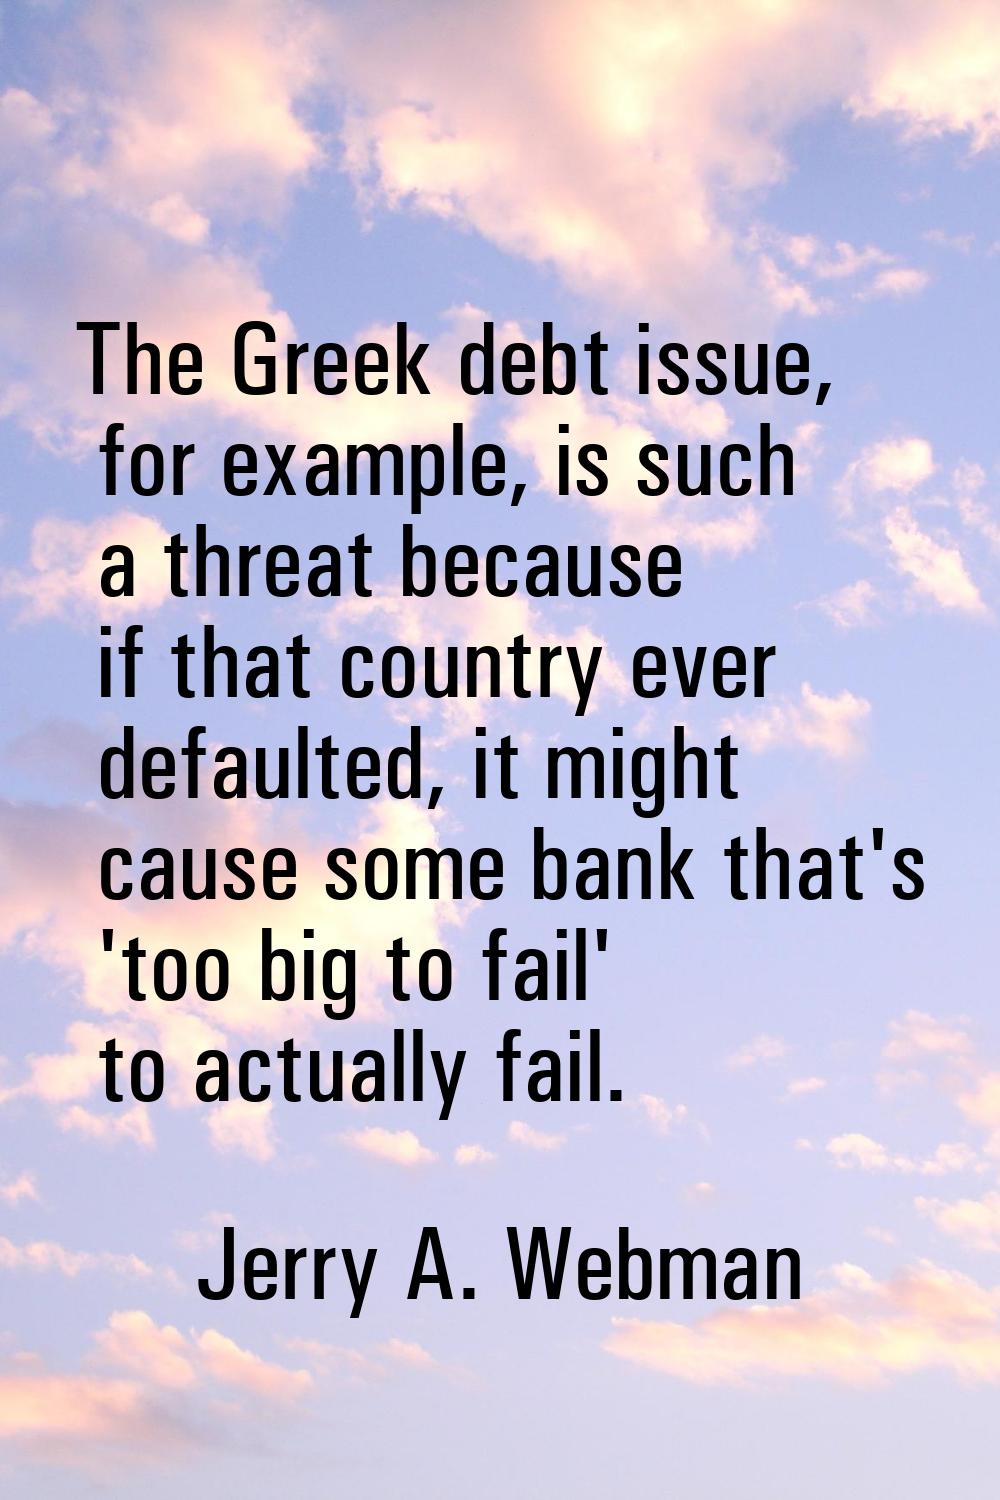 The Greek debt issue, for example, is such a threat because if that country ever defaulted, it migh